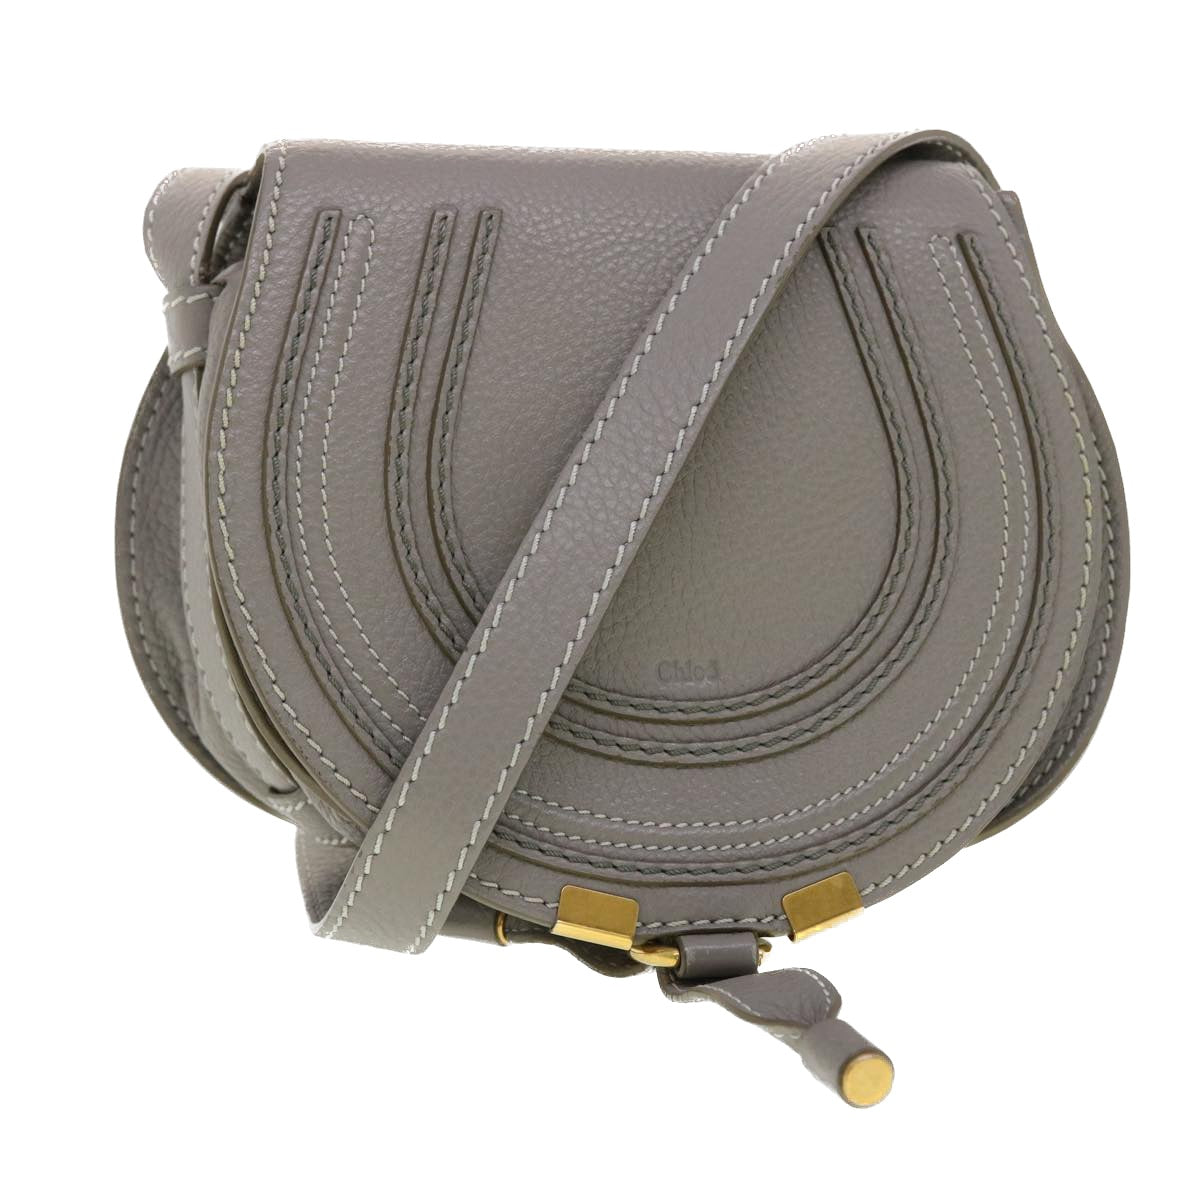 Chloe Mercy Small Saddle Shoulder Bag Leather Gray Auth am4200